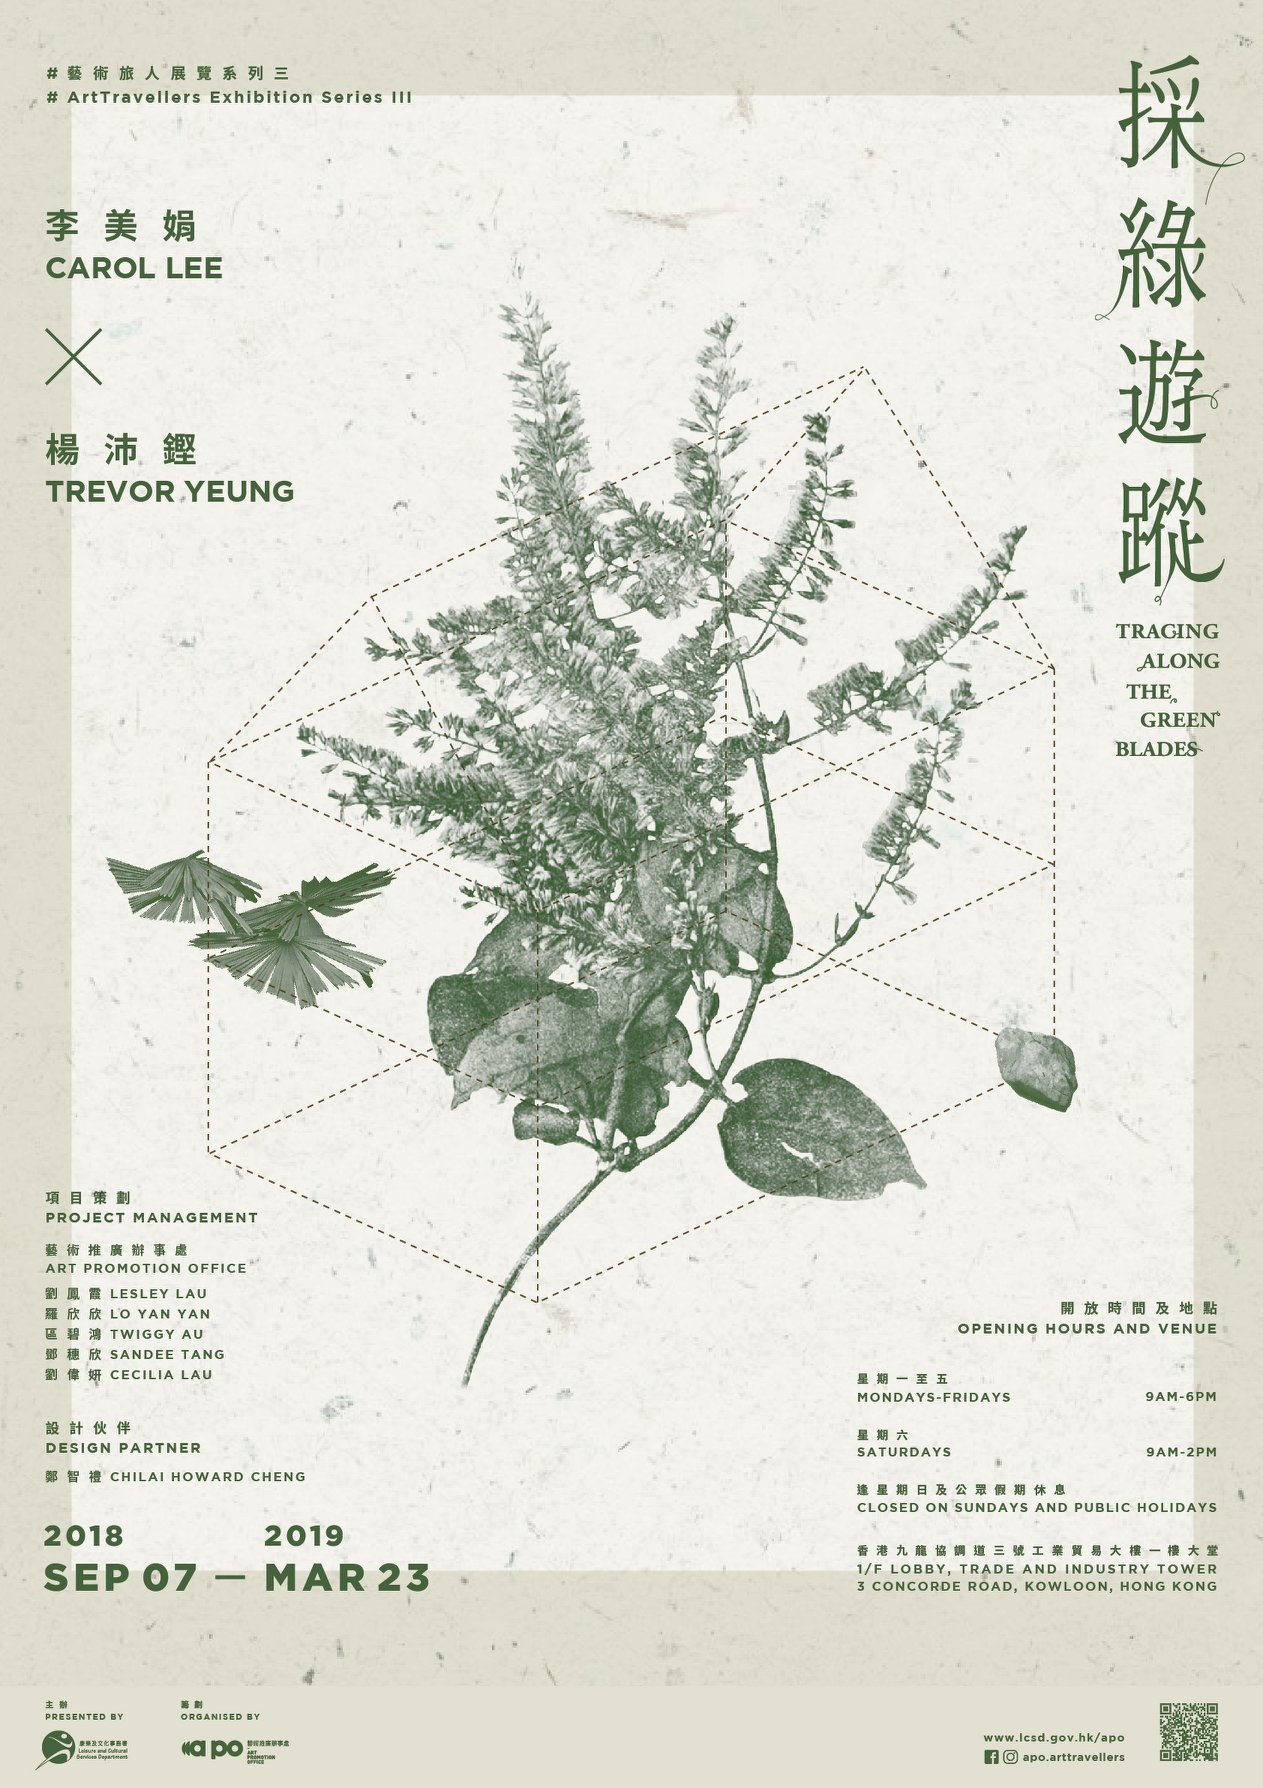 Trevor Yeung participates in group exhibition “#ArtTravellers Exhibition Series III: Tracing along the Green Blades”, Hong Kong